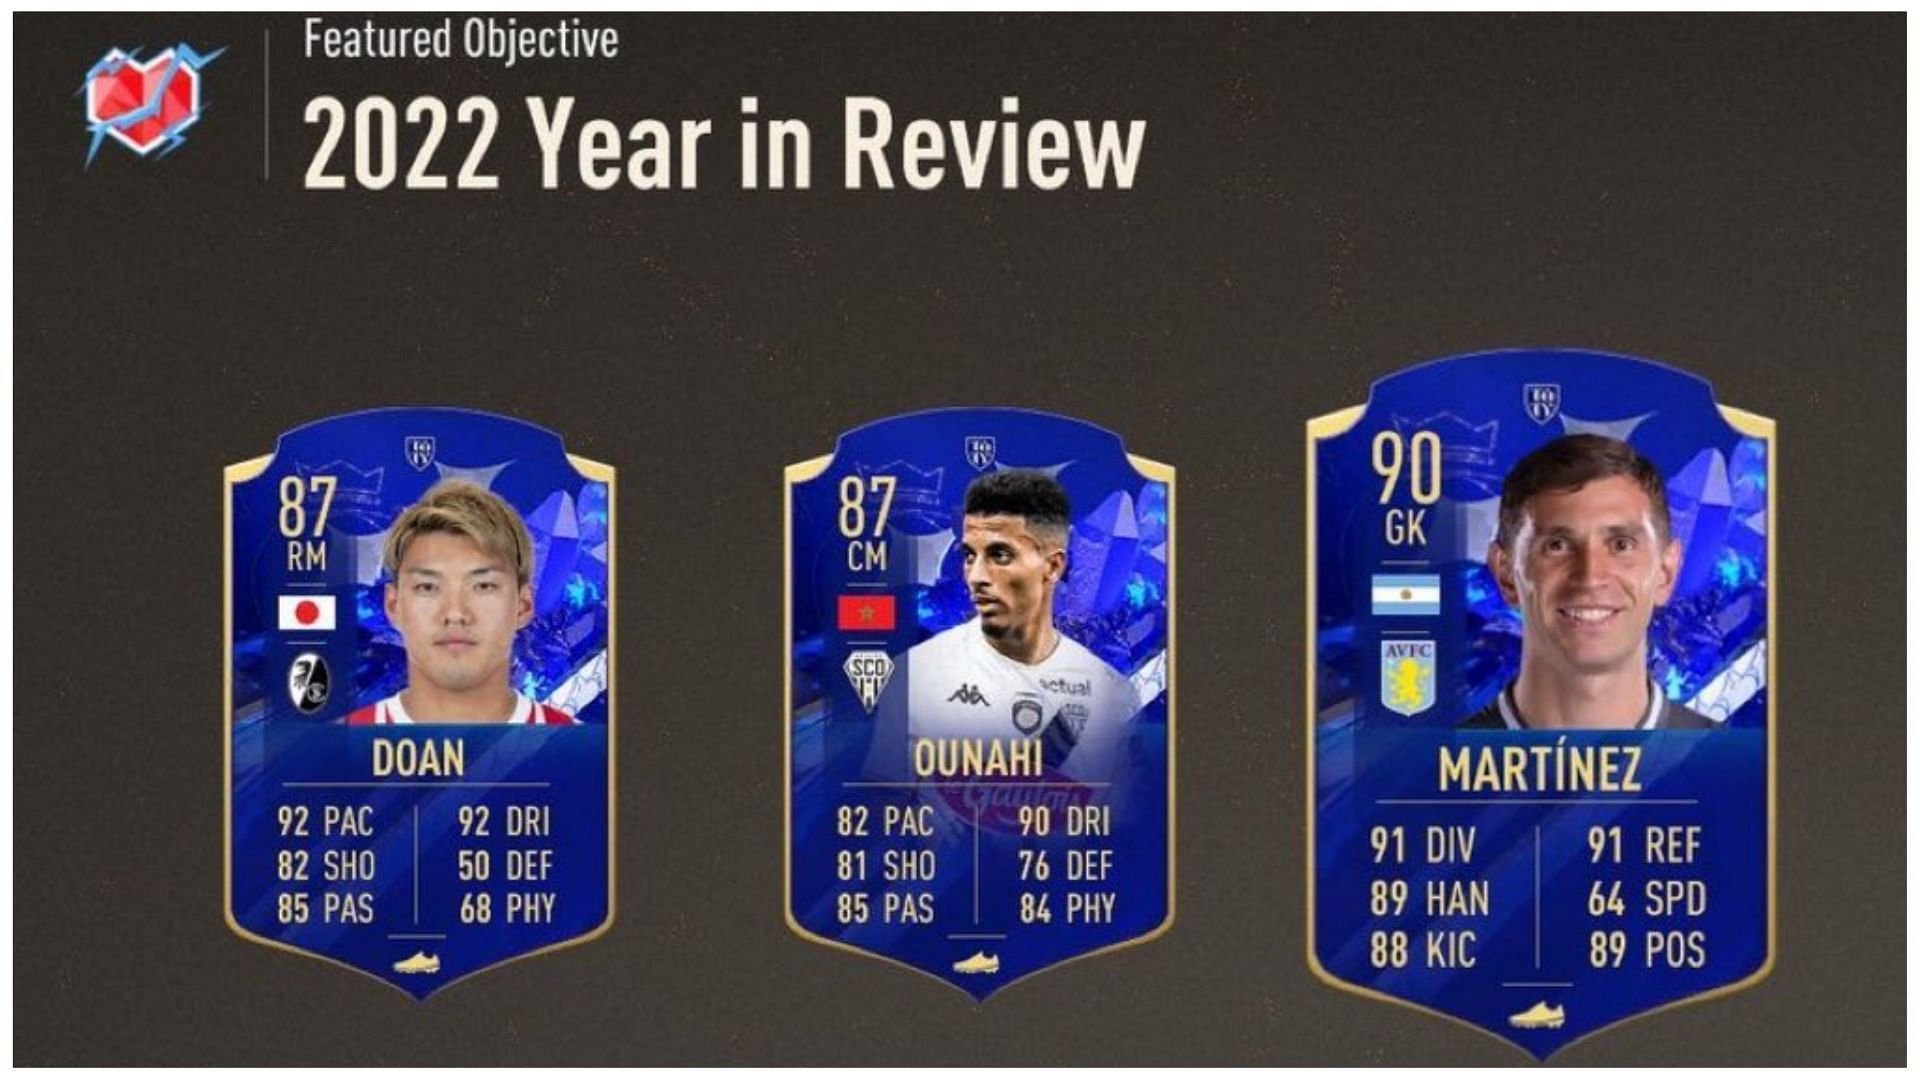 The 2022 Year in Review objective is live in FIFA 23 (Images via EA Sports)